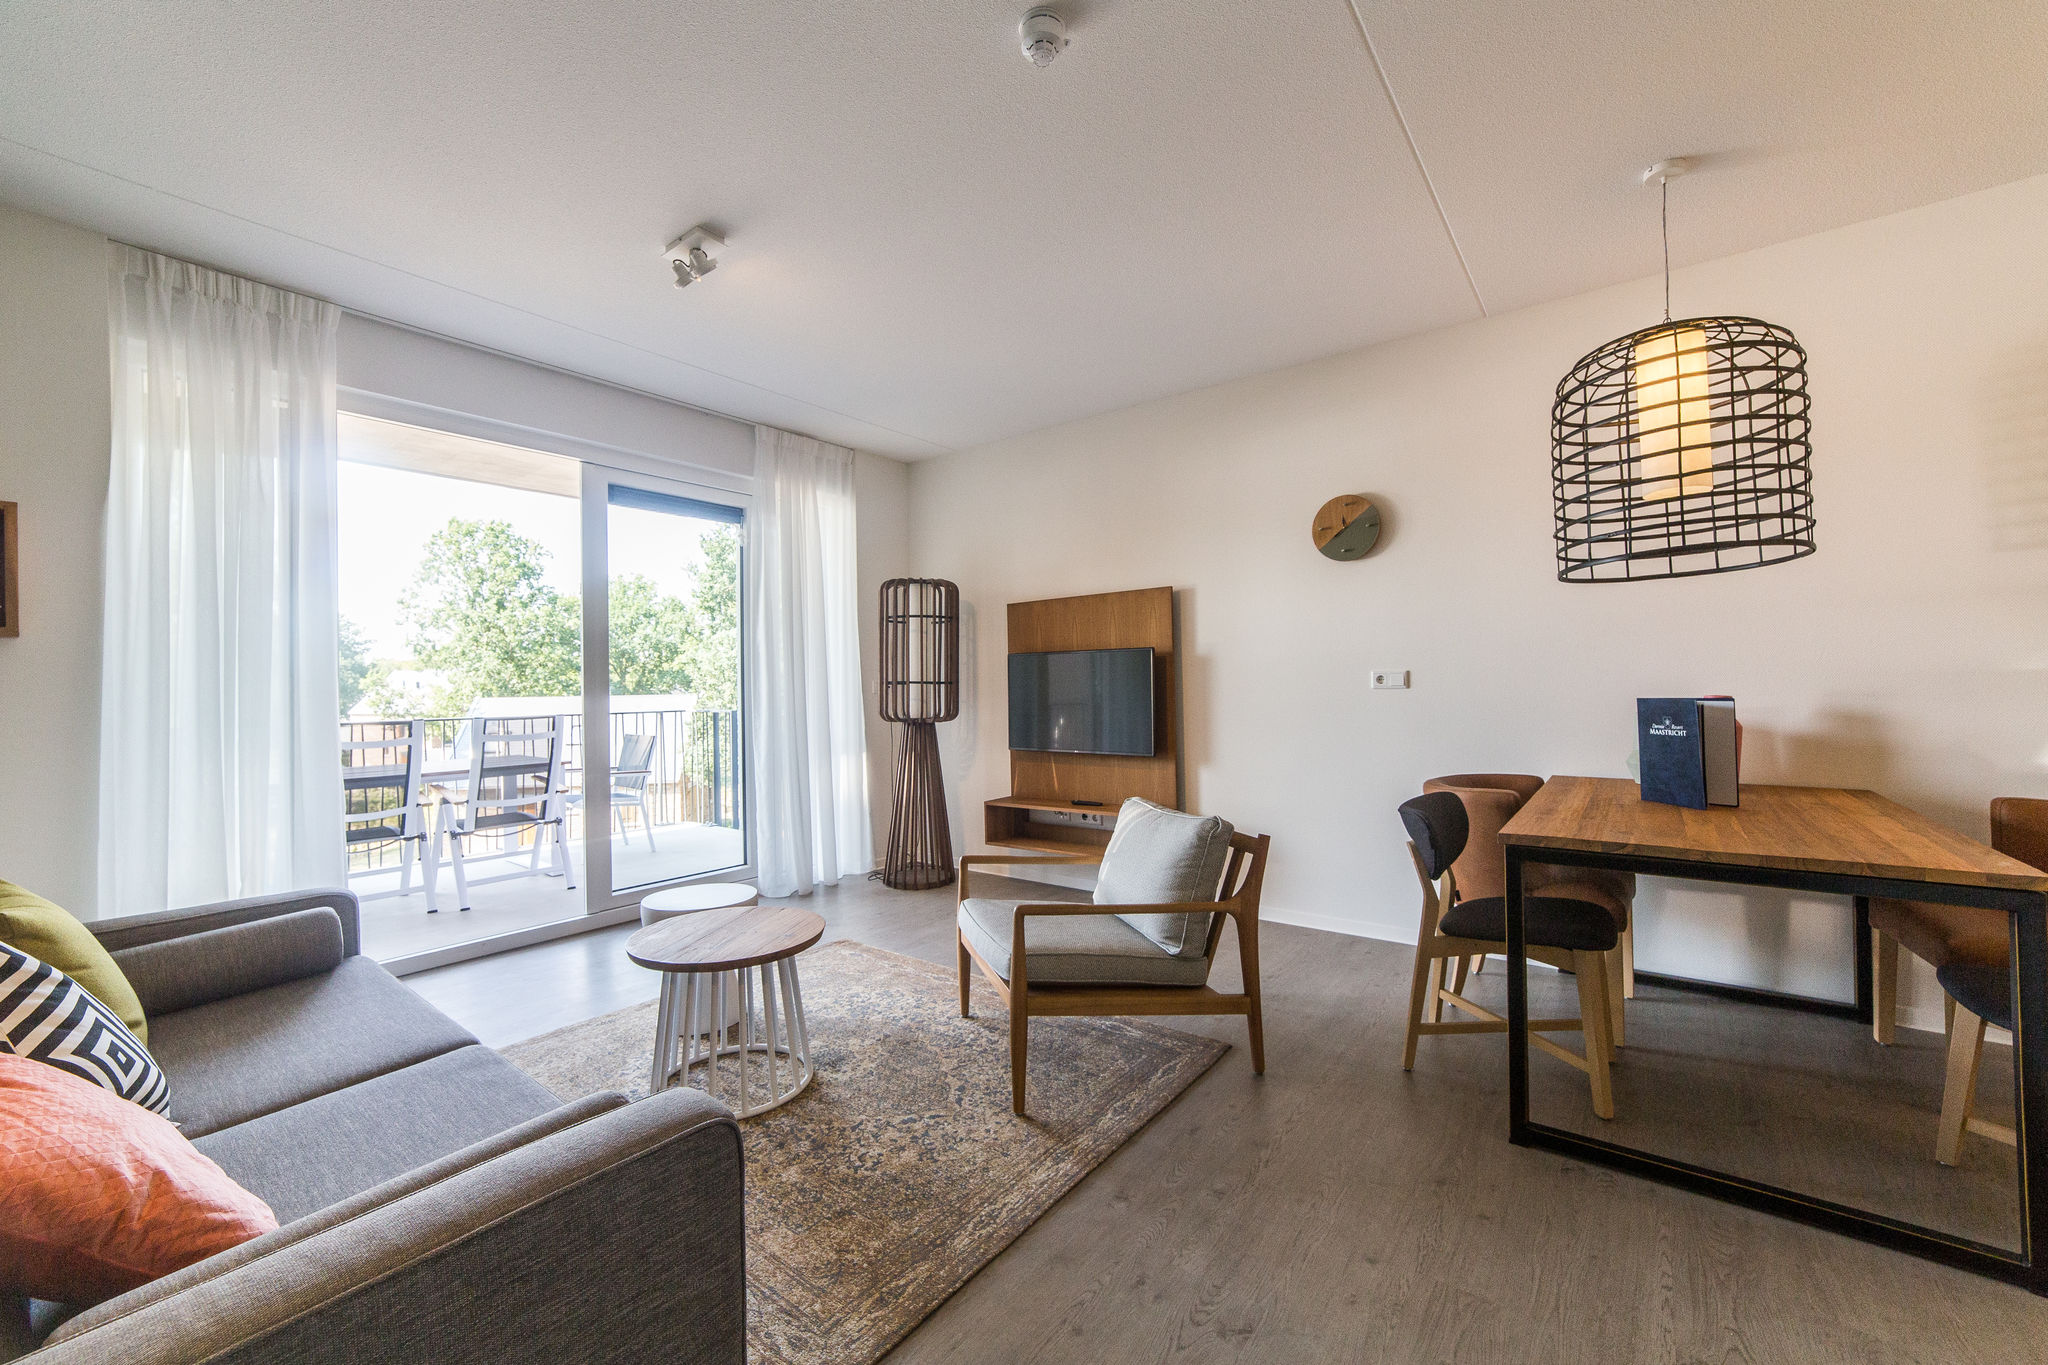 Modern apartment, just 4 km. from Maastricht